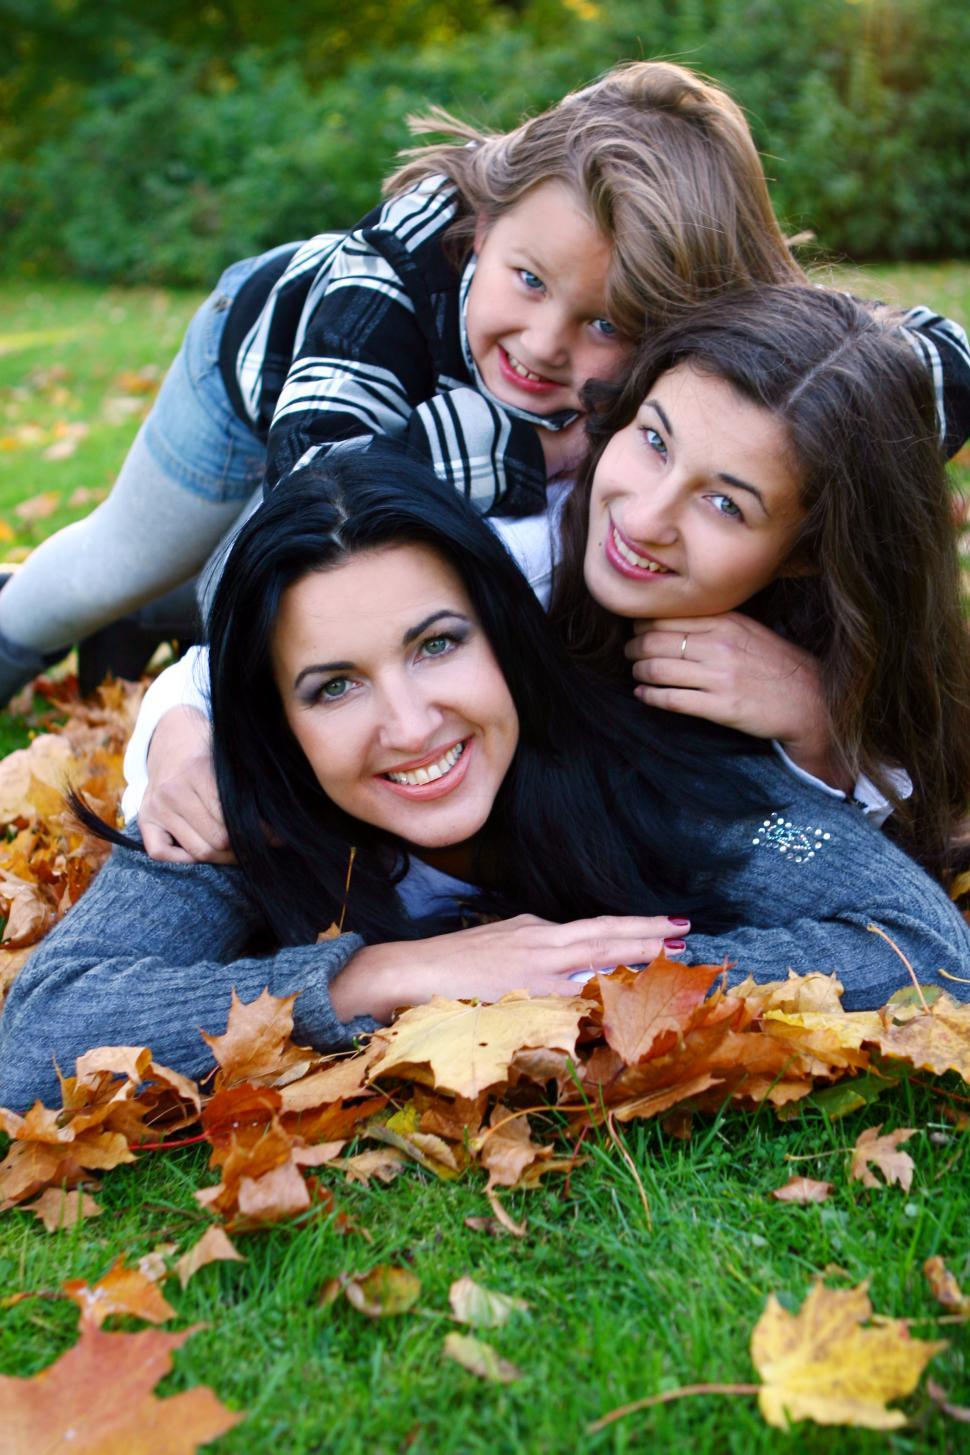 Free Image of Young family piled together in park with fallen leaves 